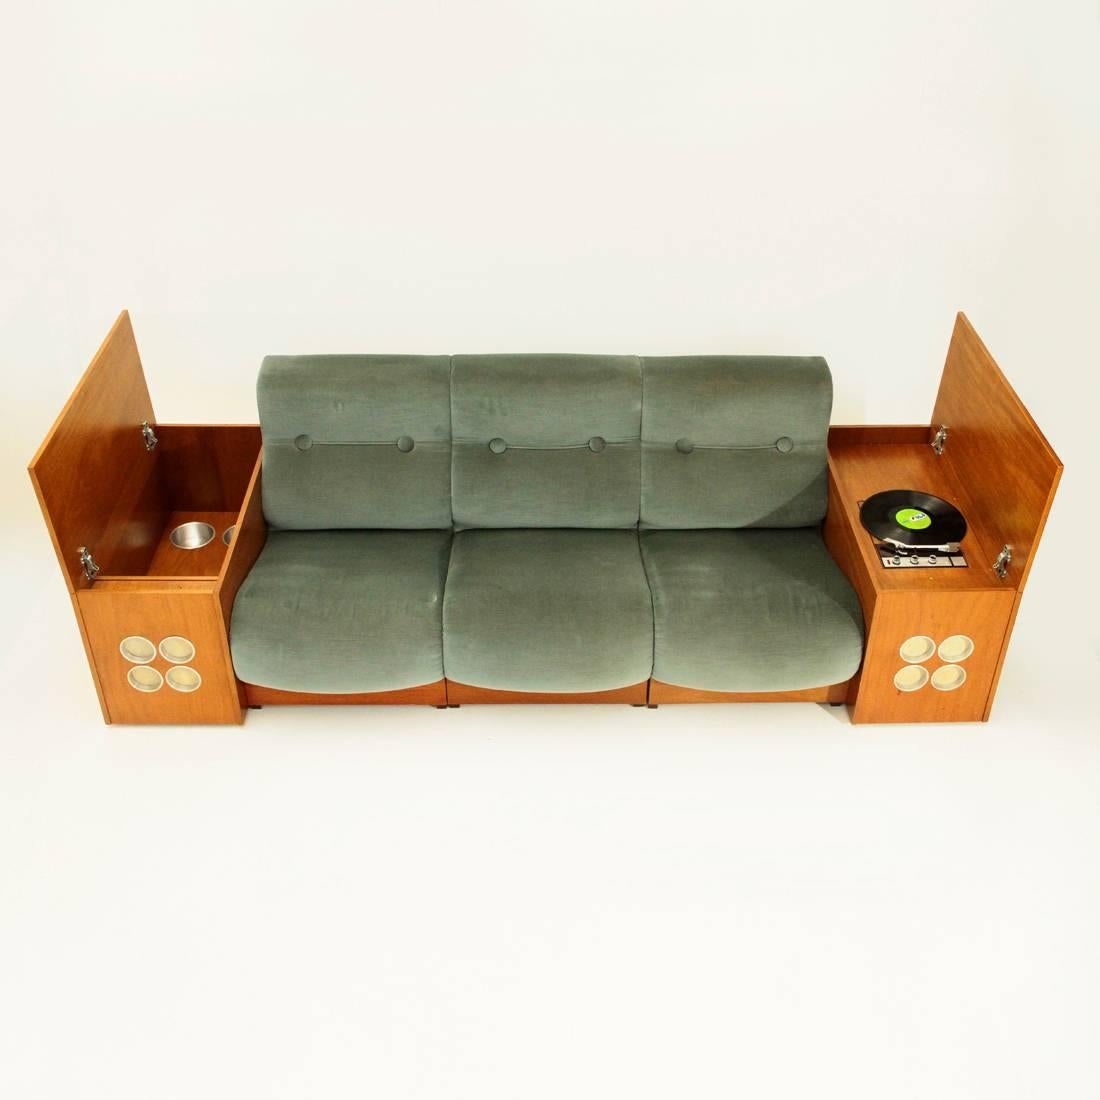 Mid-Century Modern Italian Mid-Century Modular Sofa with Bar Cabinet and Turntable Player Integrate